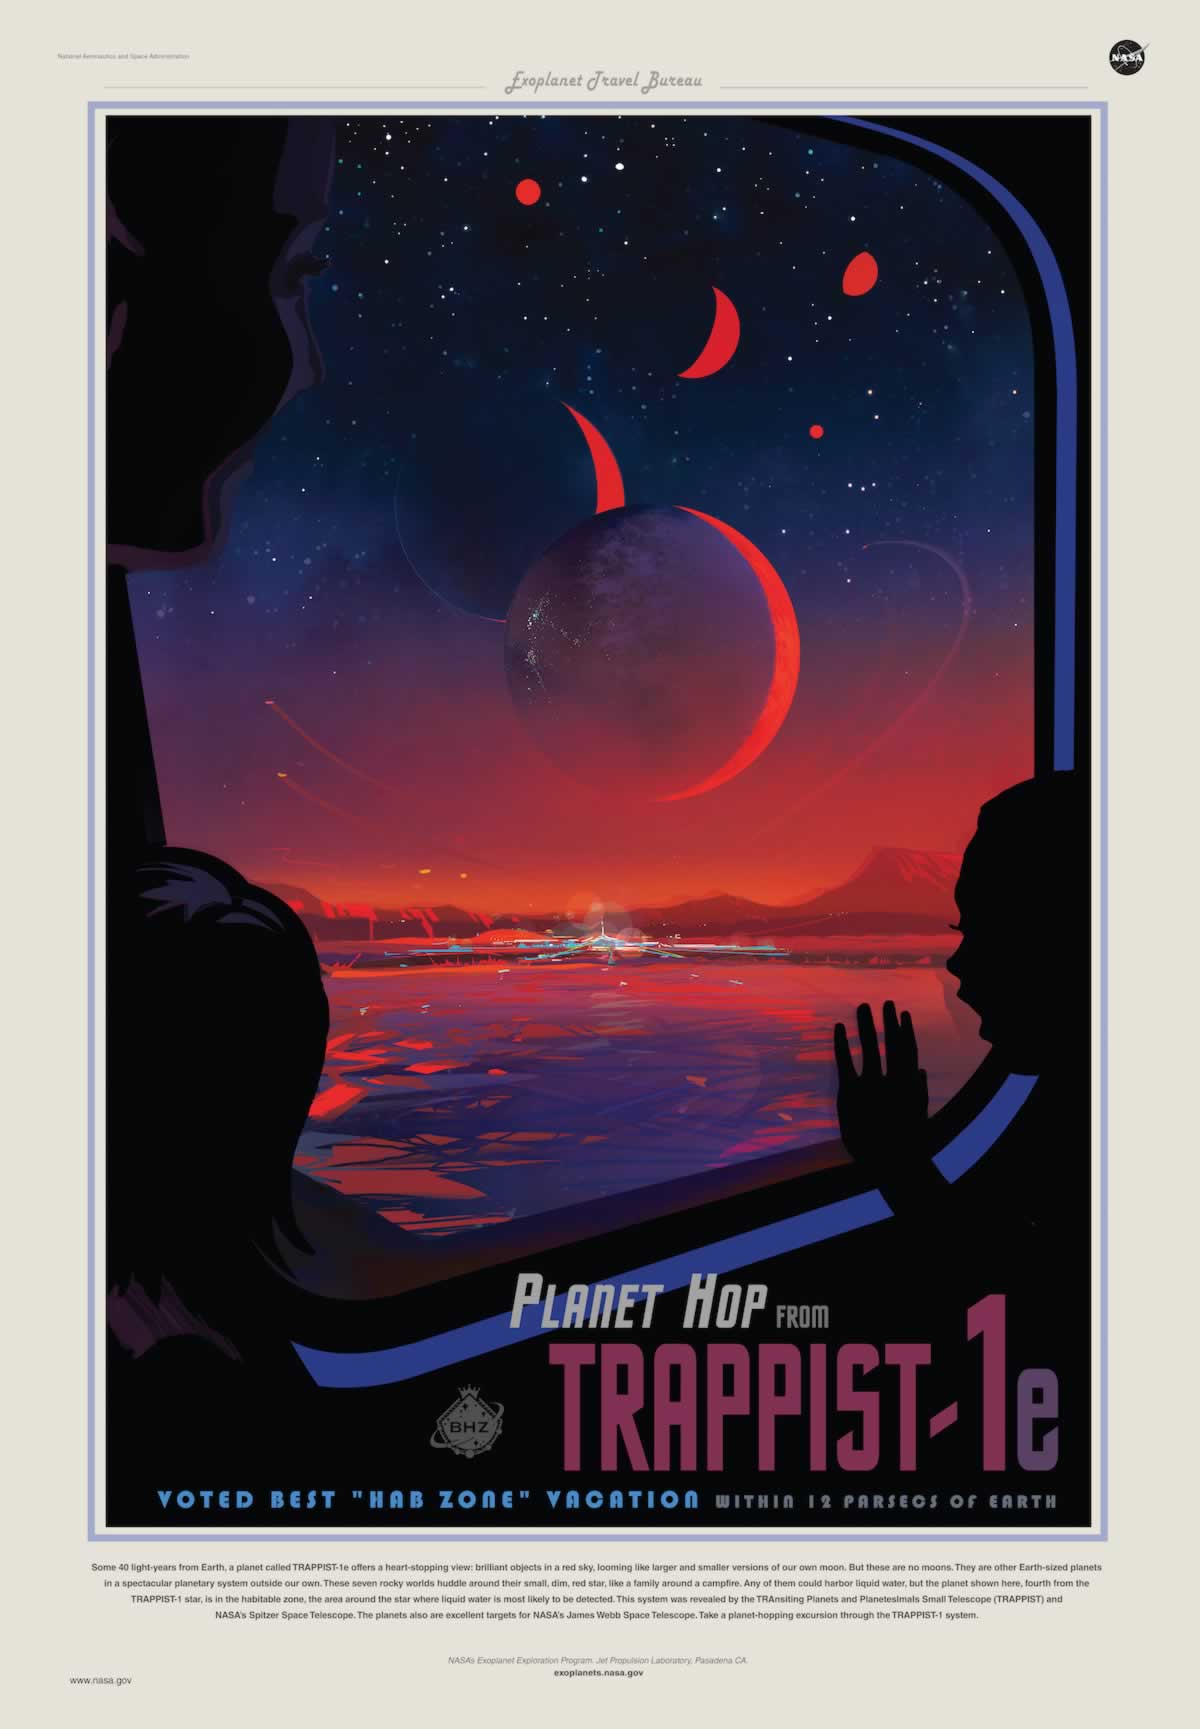 nasa poster depicts life an TRAPPIST-1 planet